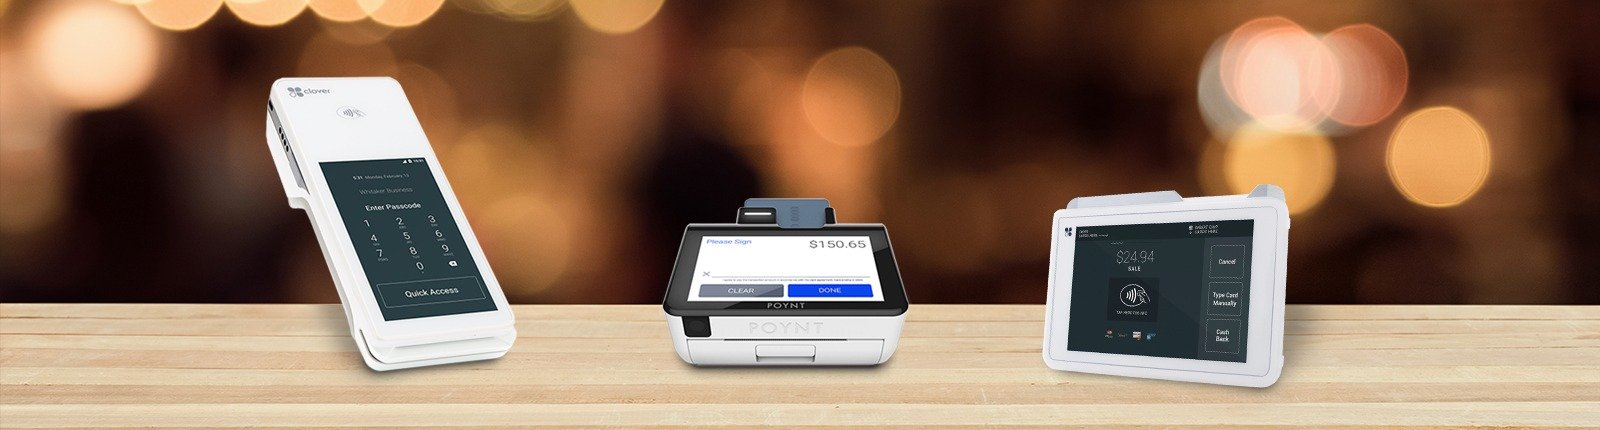 smart-terminals-the-future-of-payments1